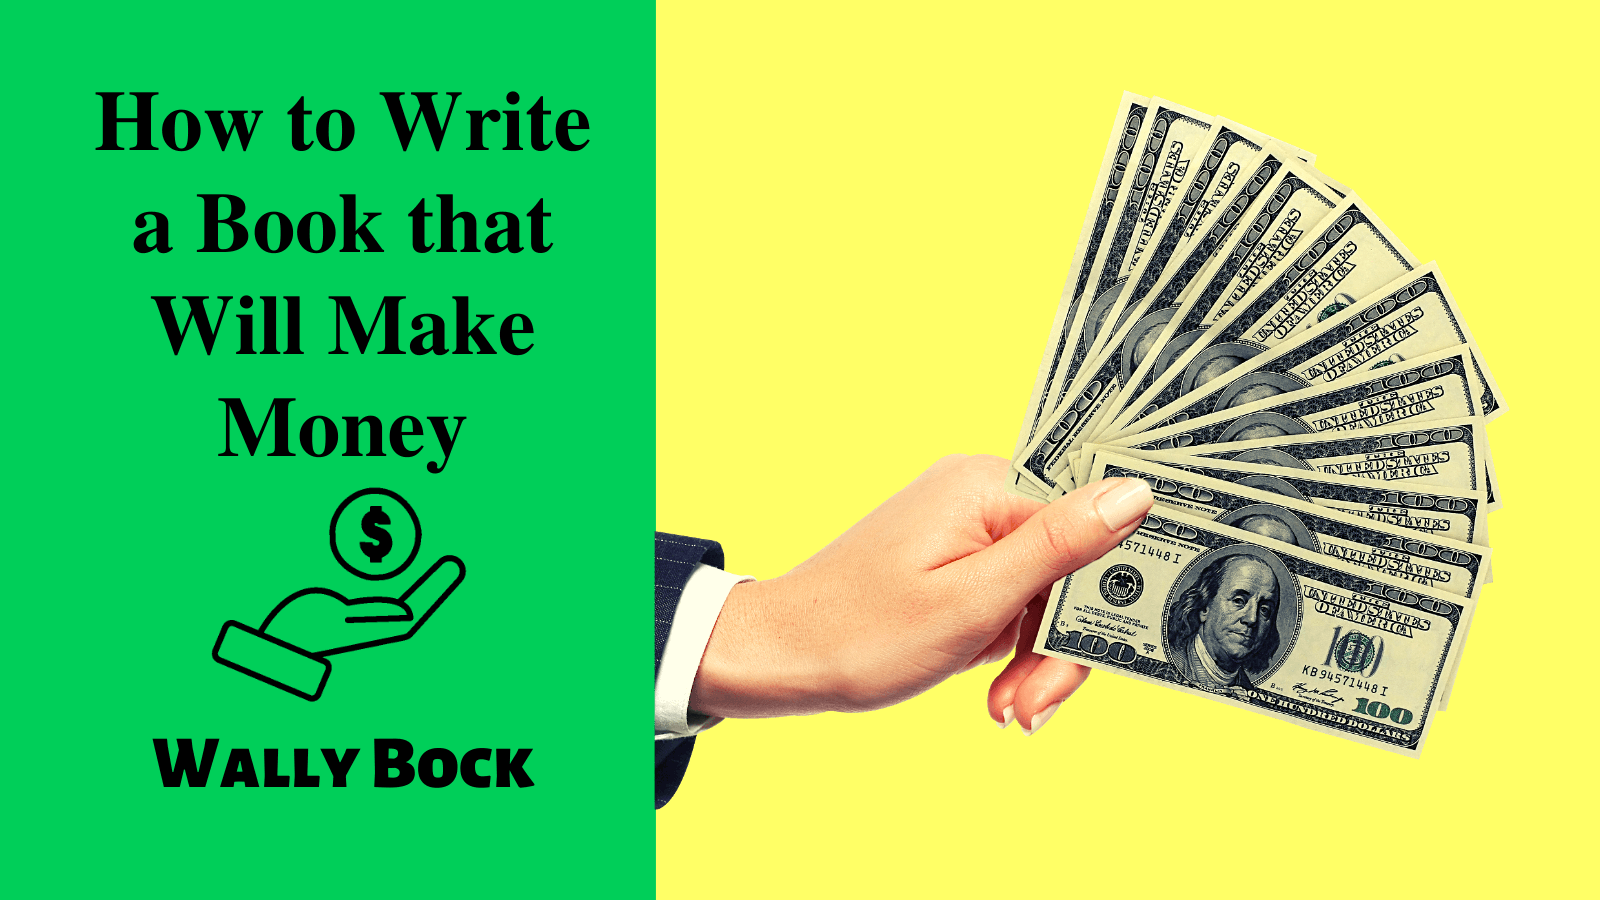 How to Write a Book that Will Make Money